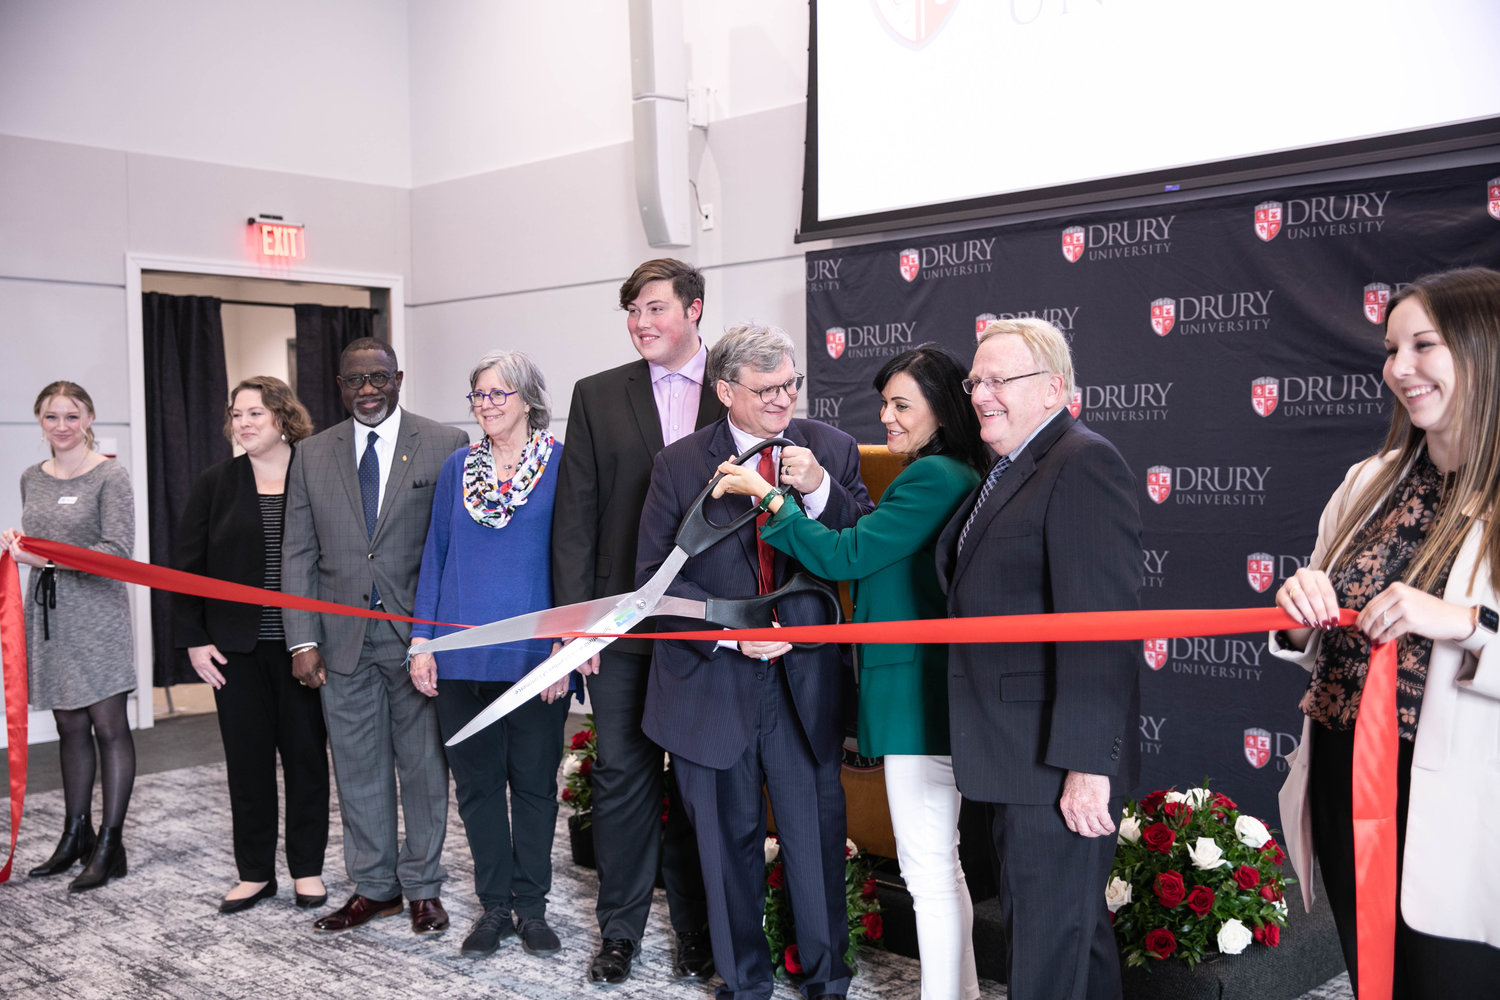 Drury University holds a ribbon-cutting ceremony Oct. 28 for its $27 million C.H. “Chub” O’Reilly Enterprise Center.